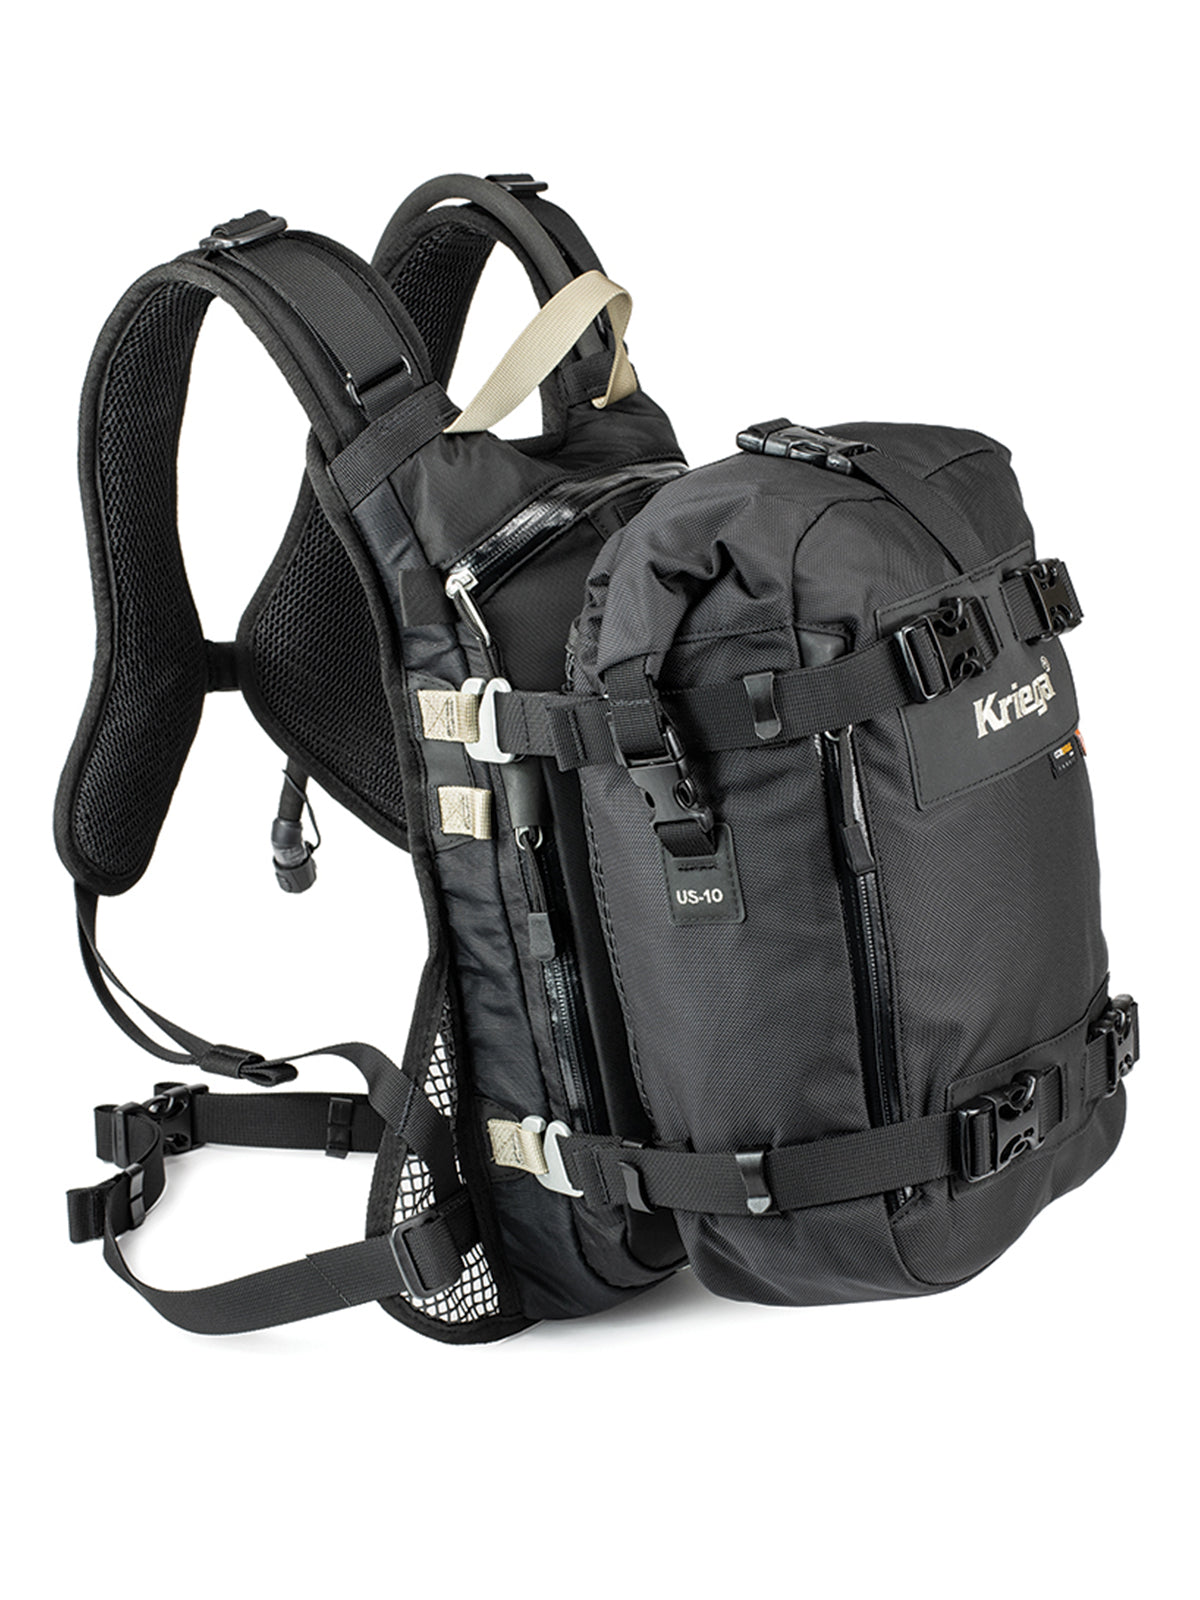 Kriega US10 Drypack attached to backpack